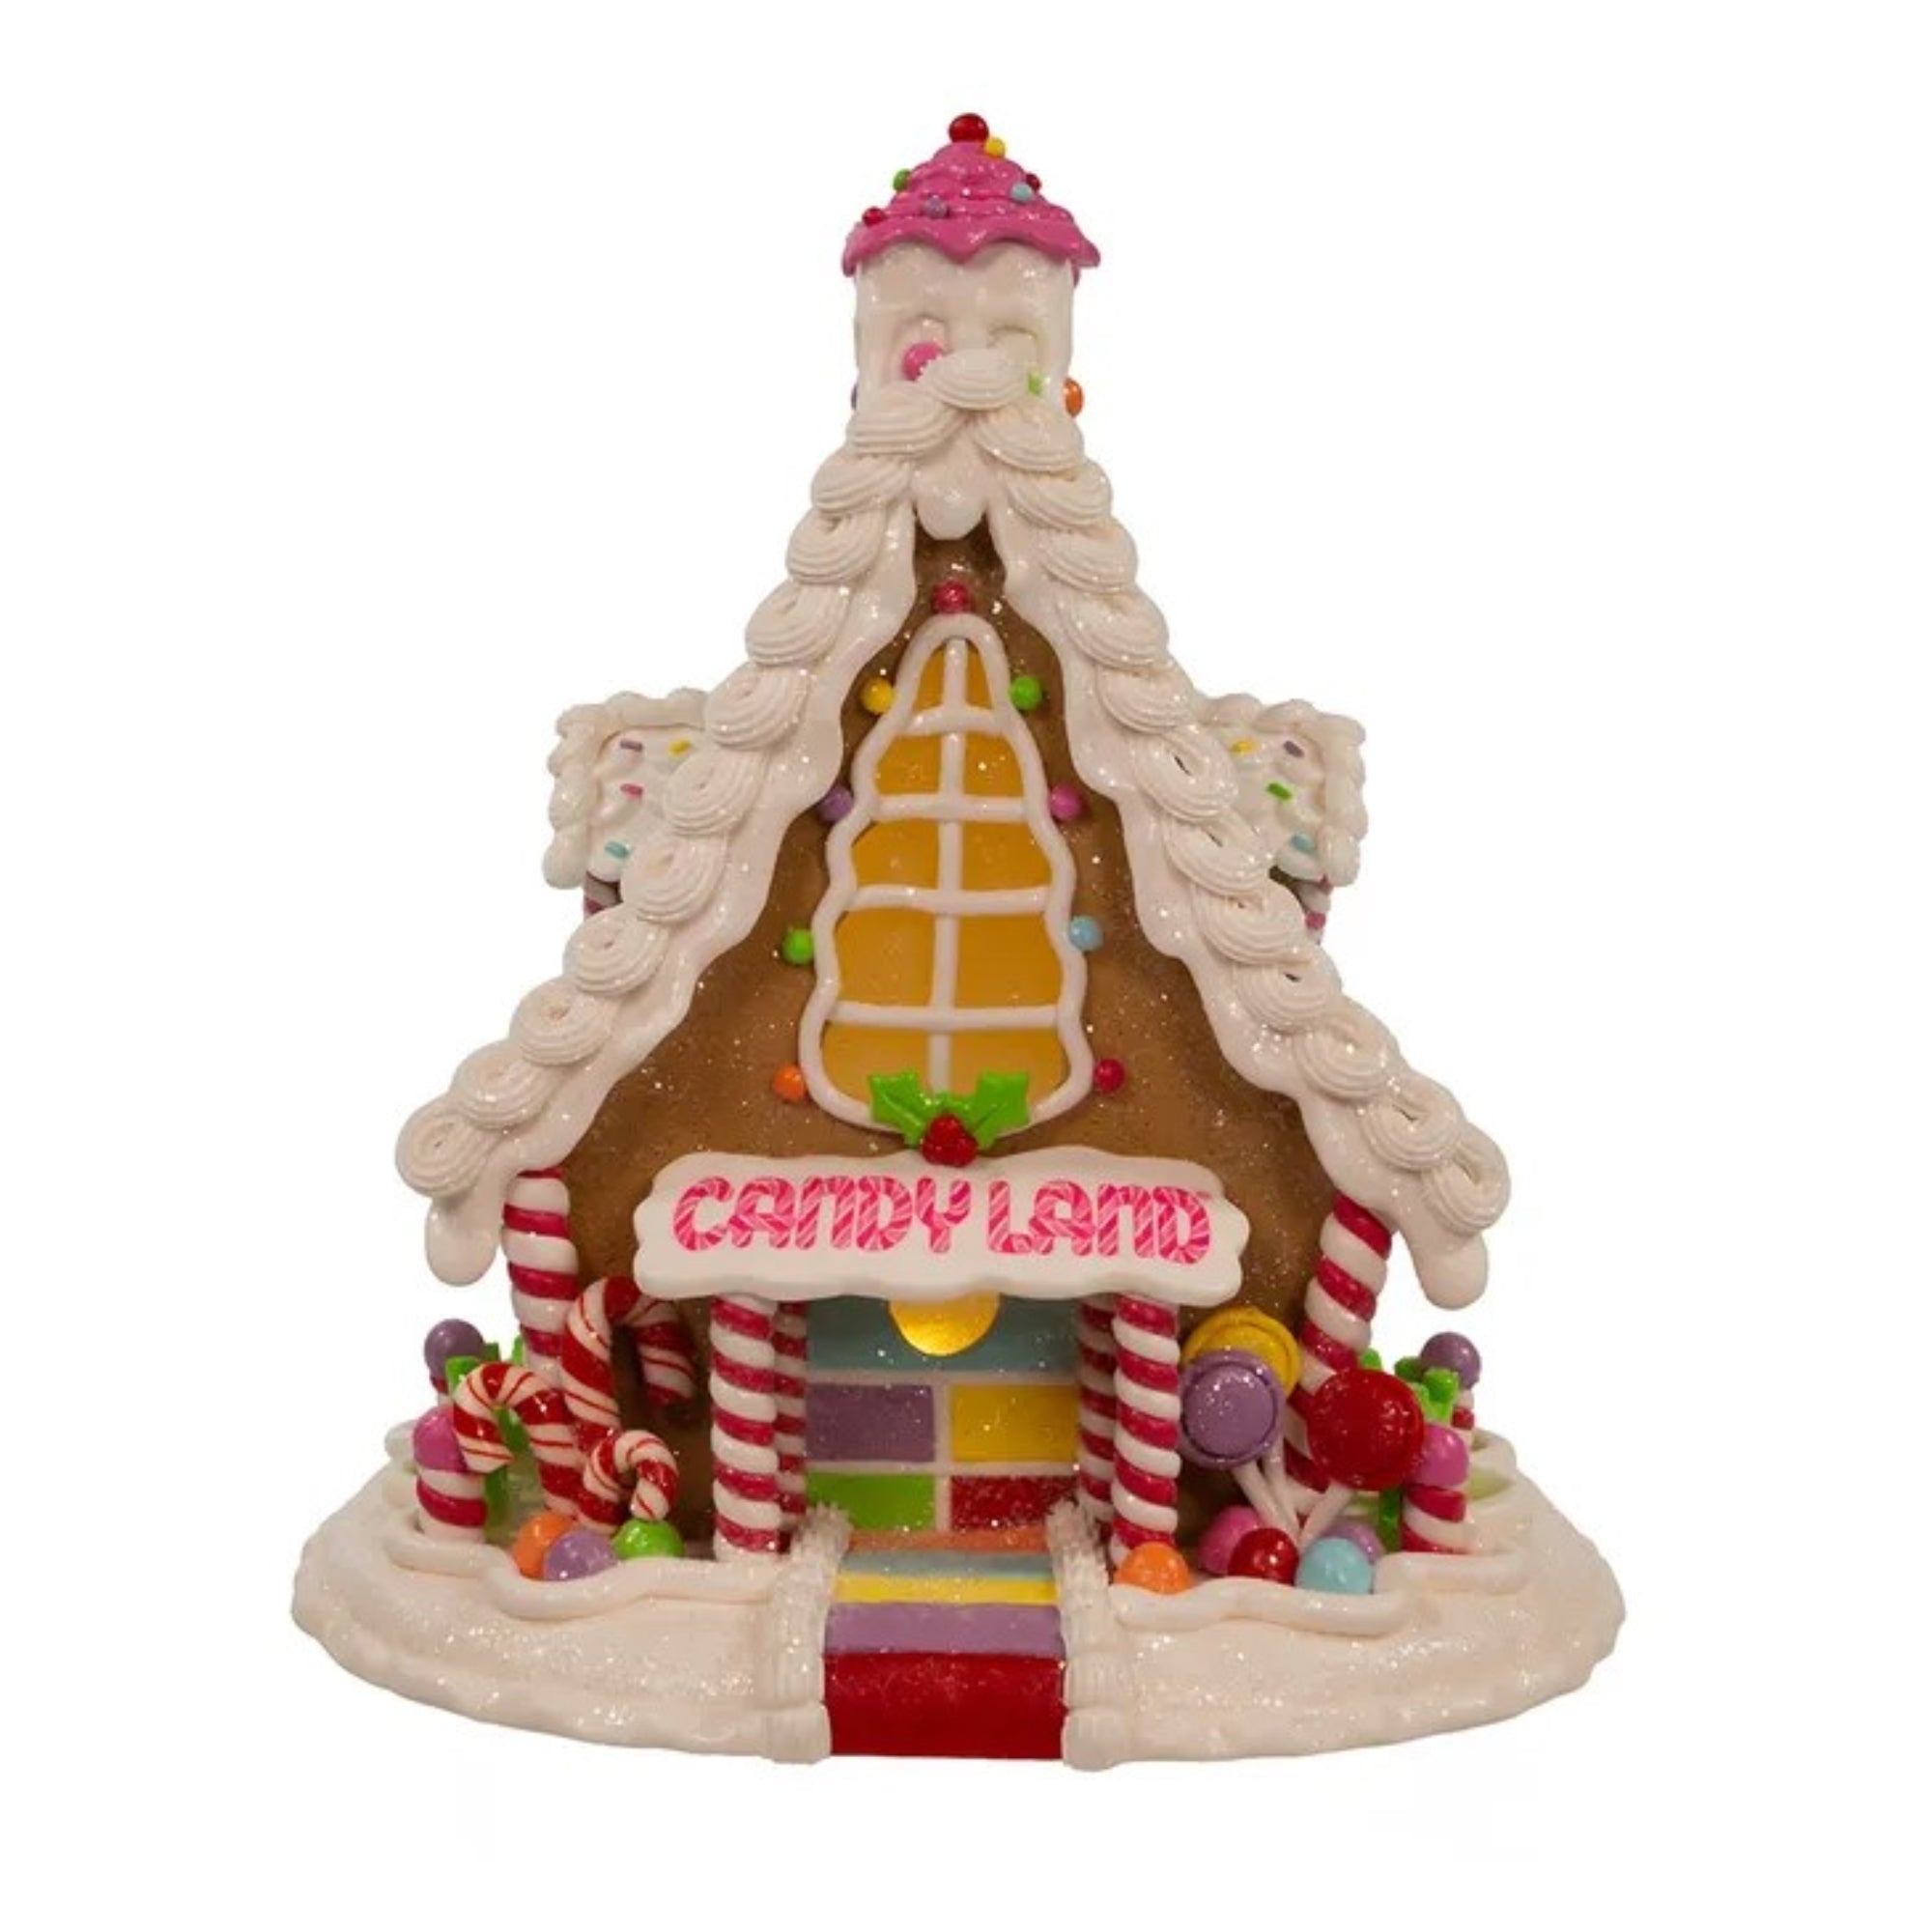 Kurt Adler Battery Operated Lit Candyland Gingerbread House Table Piece, 11.5"